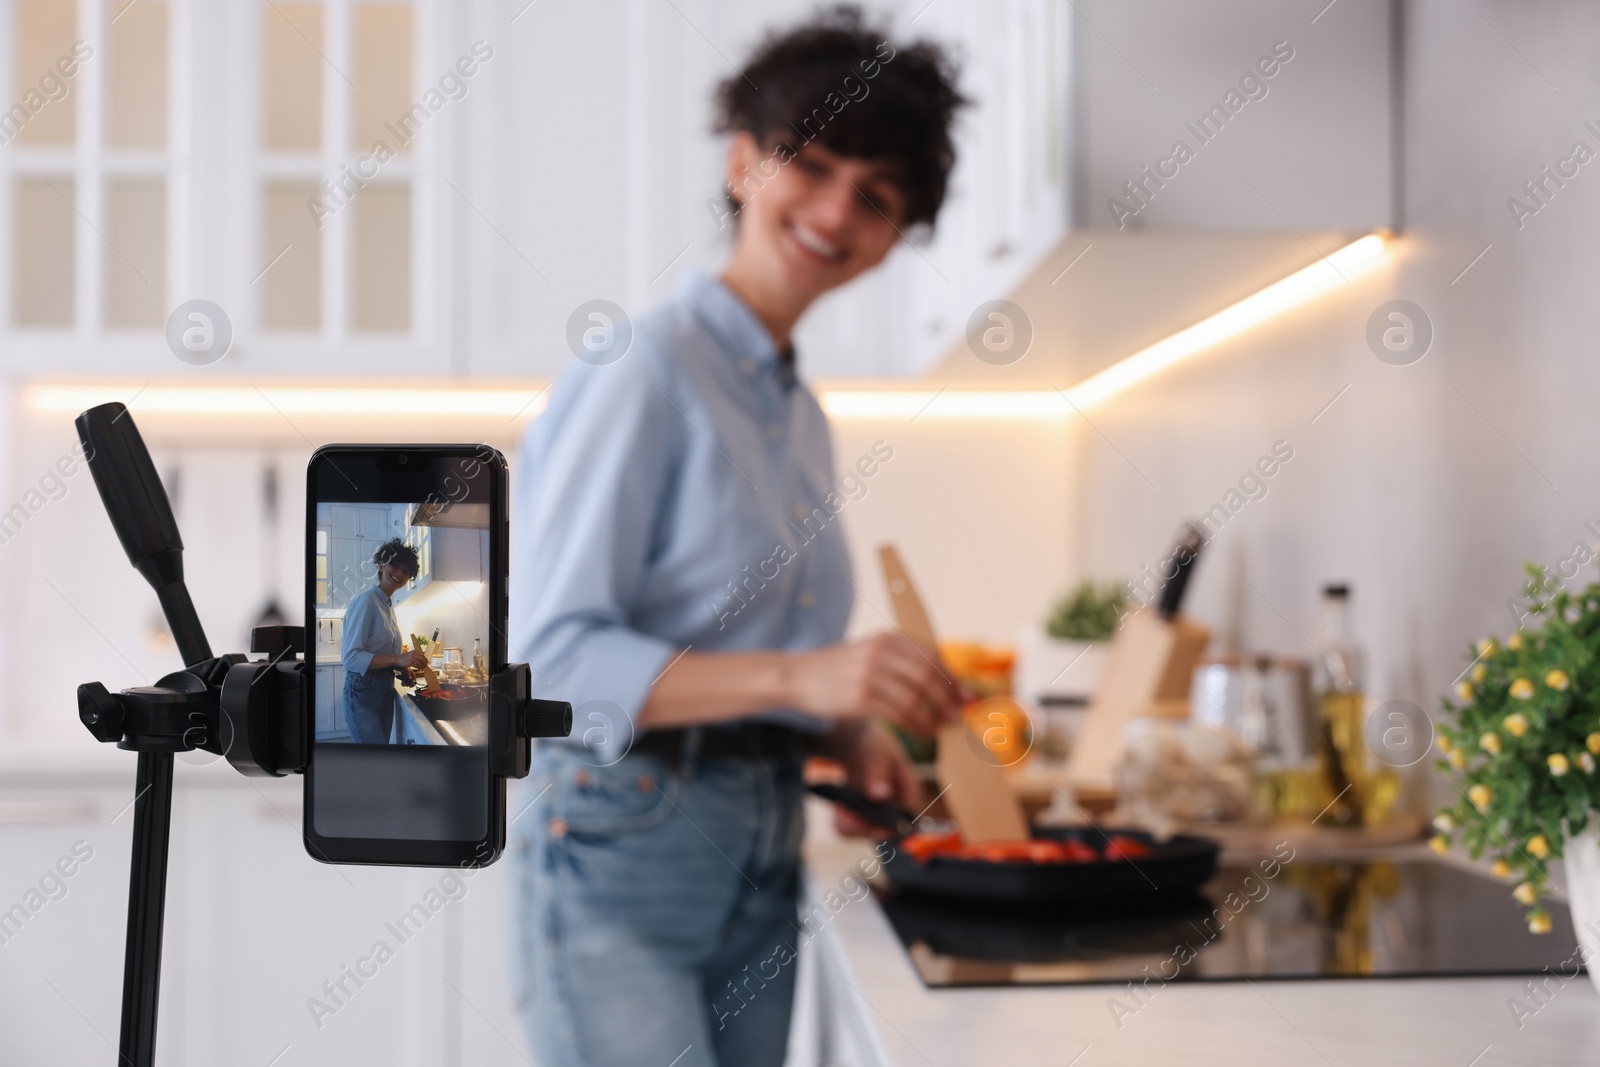 Photo of Food blogger cooking while recording video in kitchen, focus on smartphone